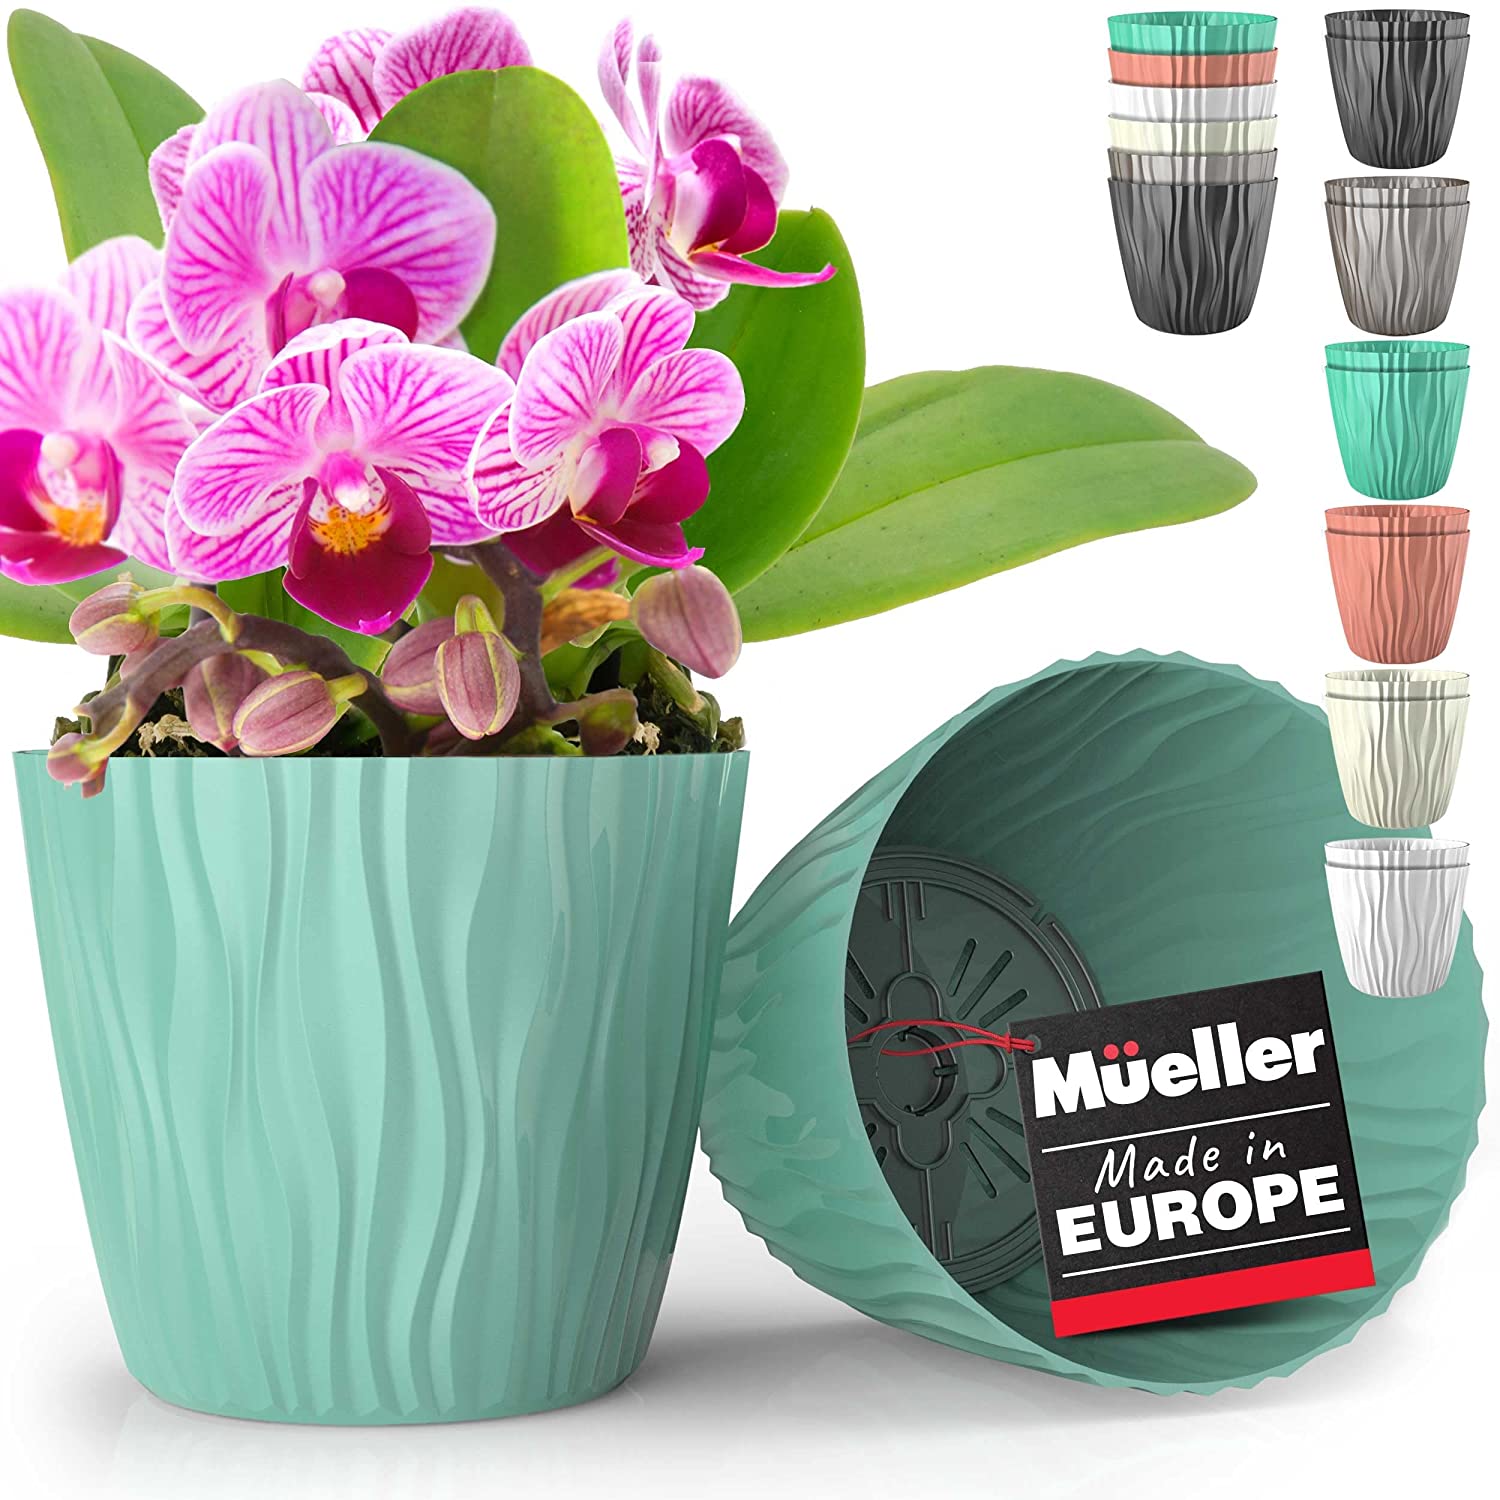 muellerhome_Decorative-Plant-and-Flower-Pots- Small-2-Piece-Green-Set